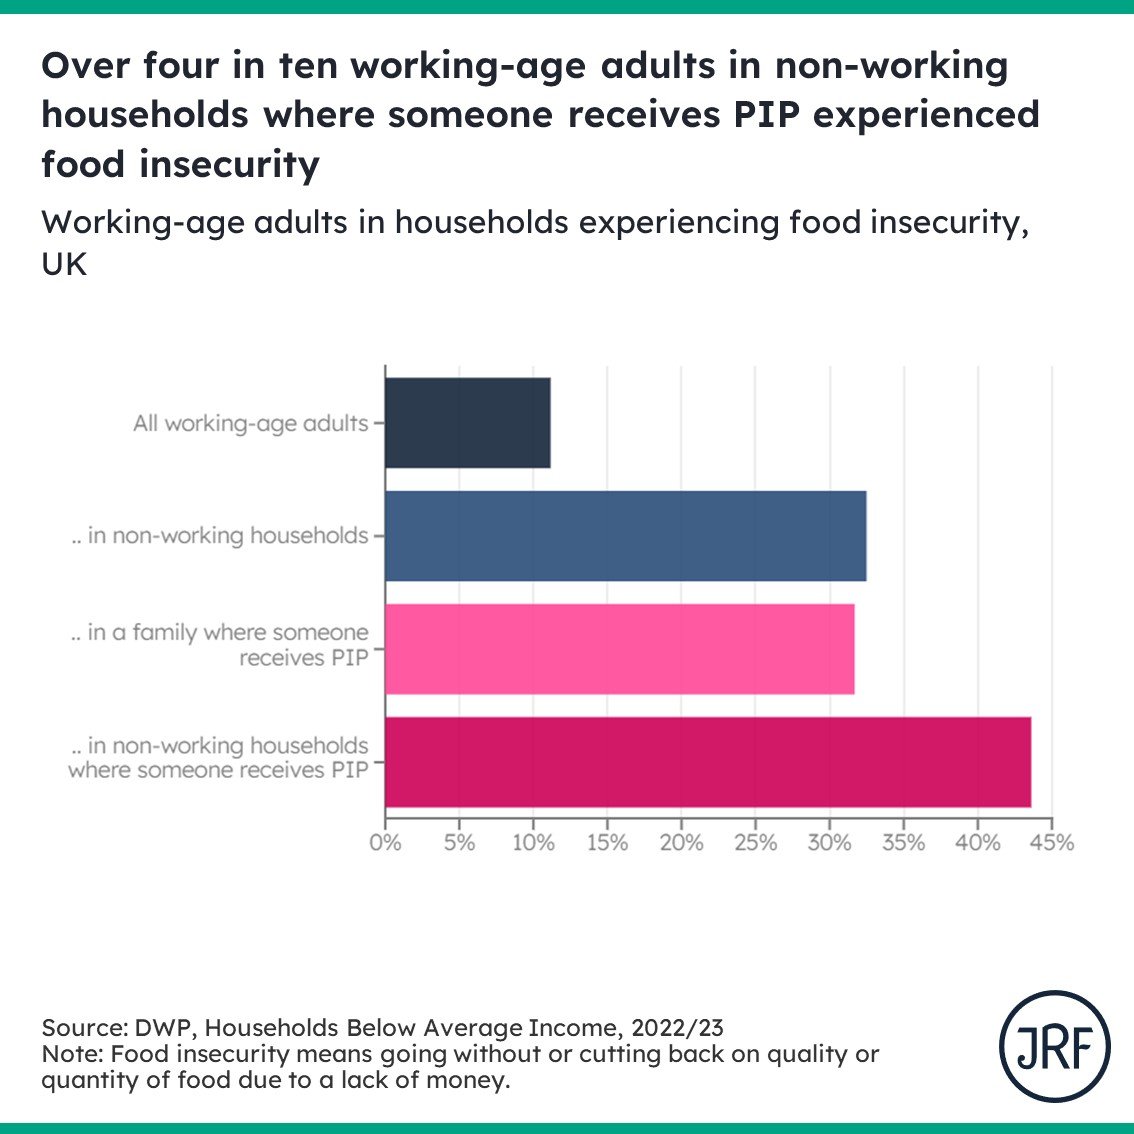 As the discussion rumbles on, let's not forget that 44% of all households without anyone in work + receiving PIP experienced food insecurity in 2022-23. Massively paring back PIP without providing any replacement is a road to even deeper hardship for these families.